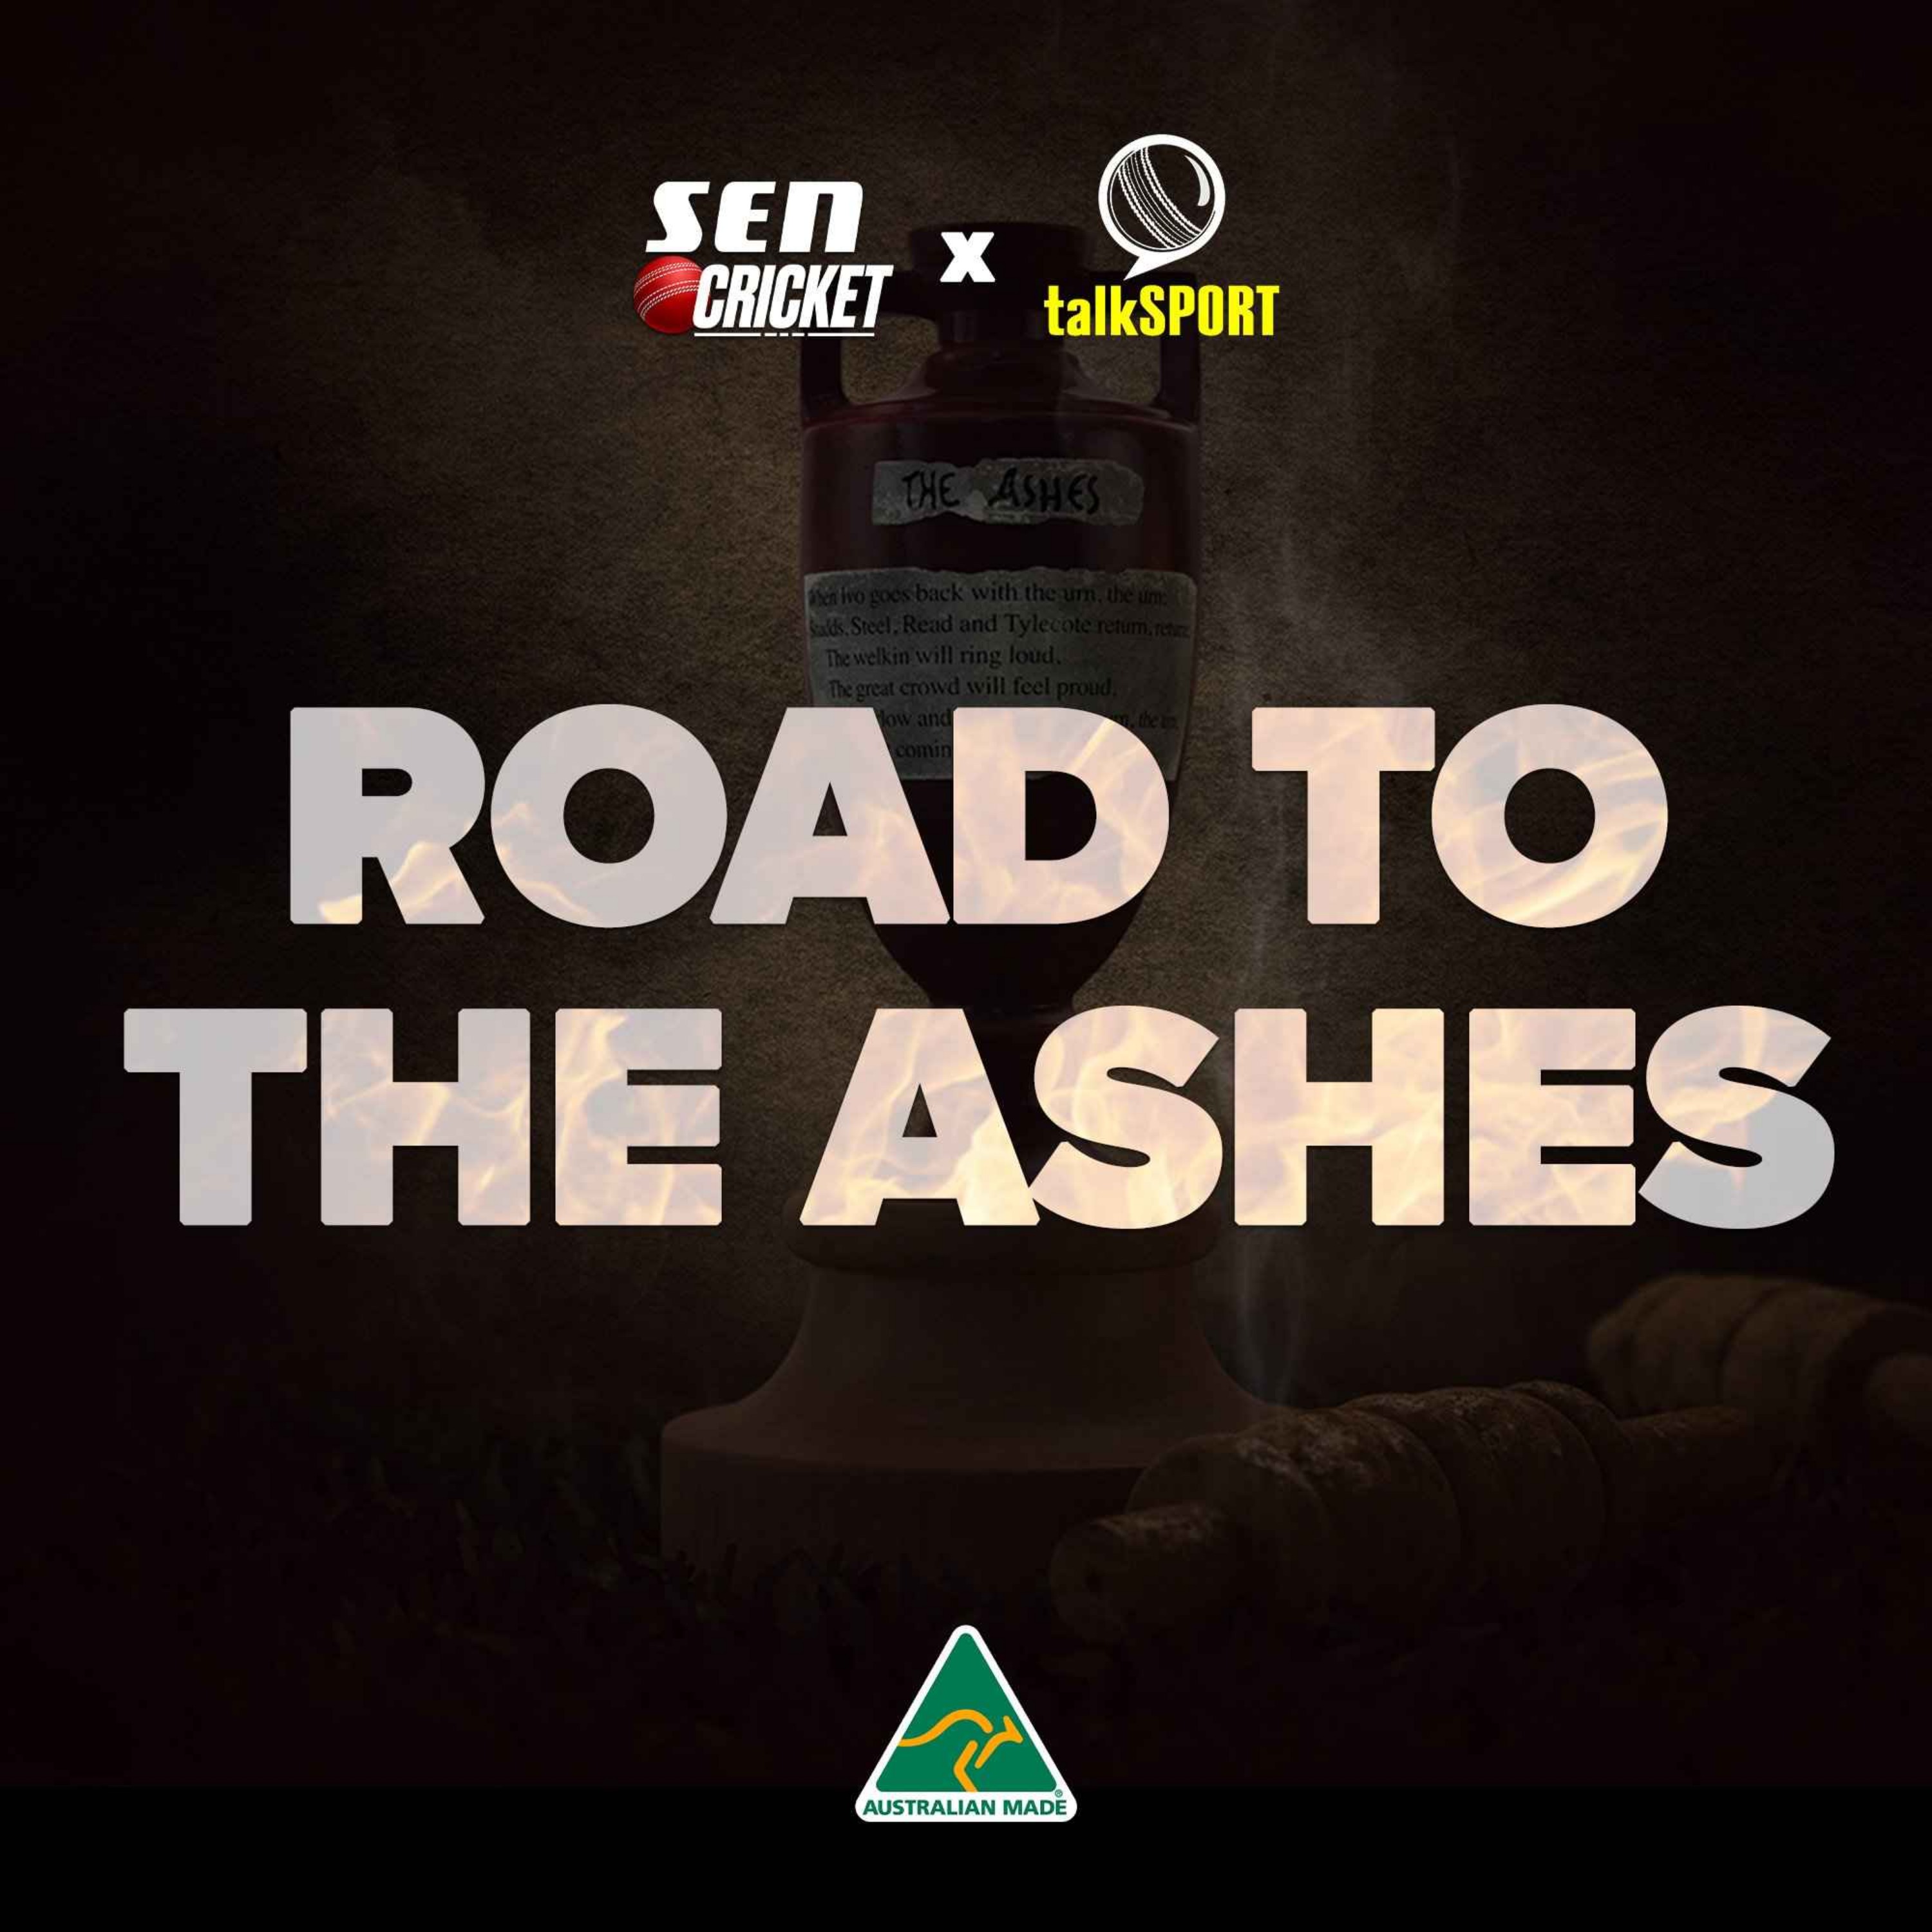 Road To The Ashes EP1: Our Ashes Preview & Matt Renshaw Exclusive!